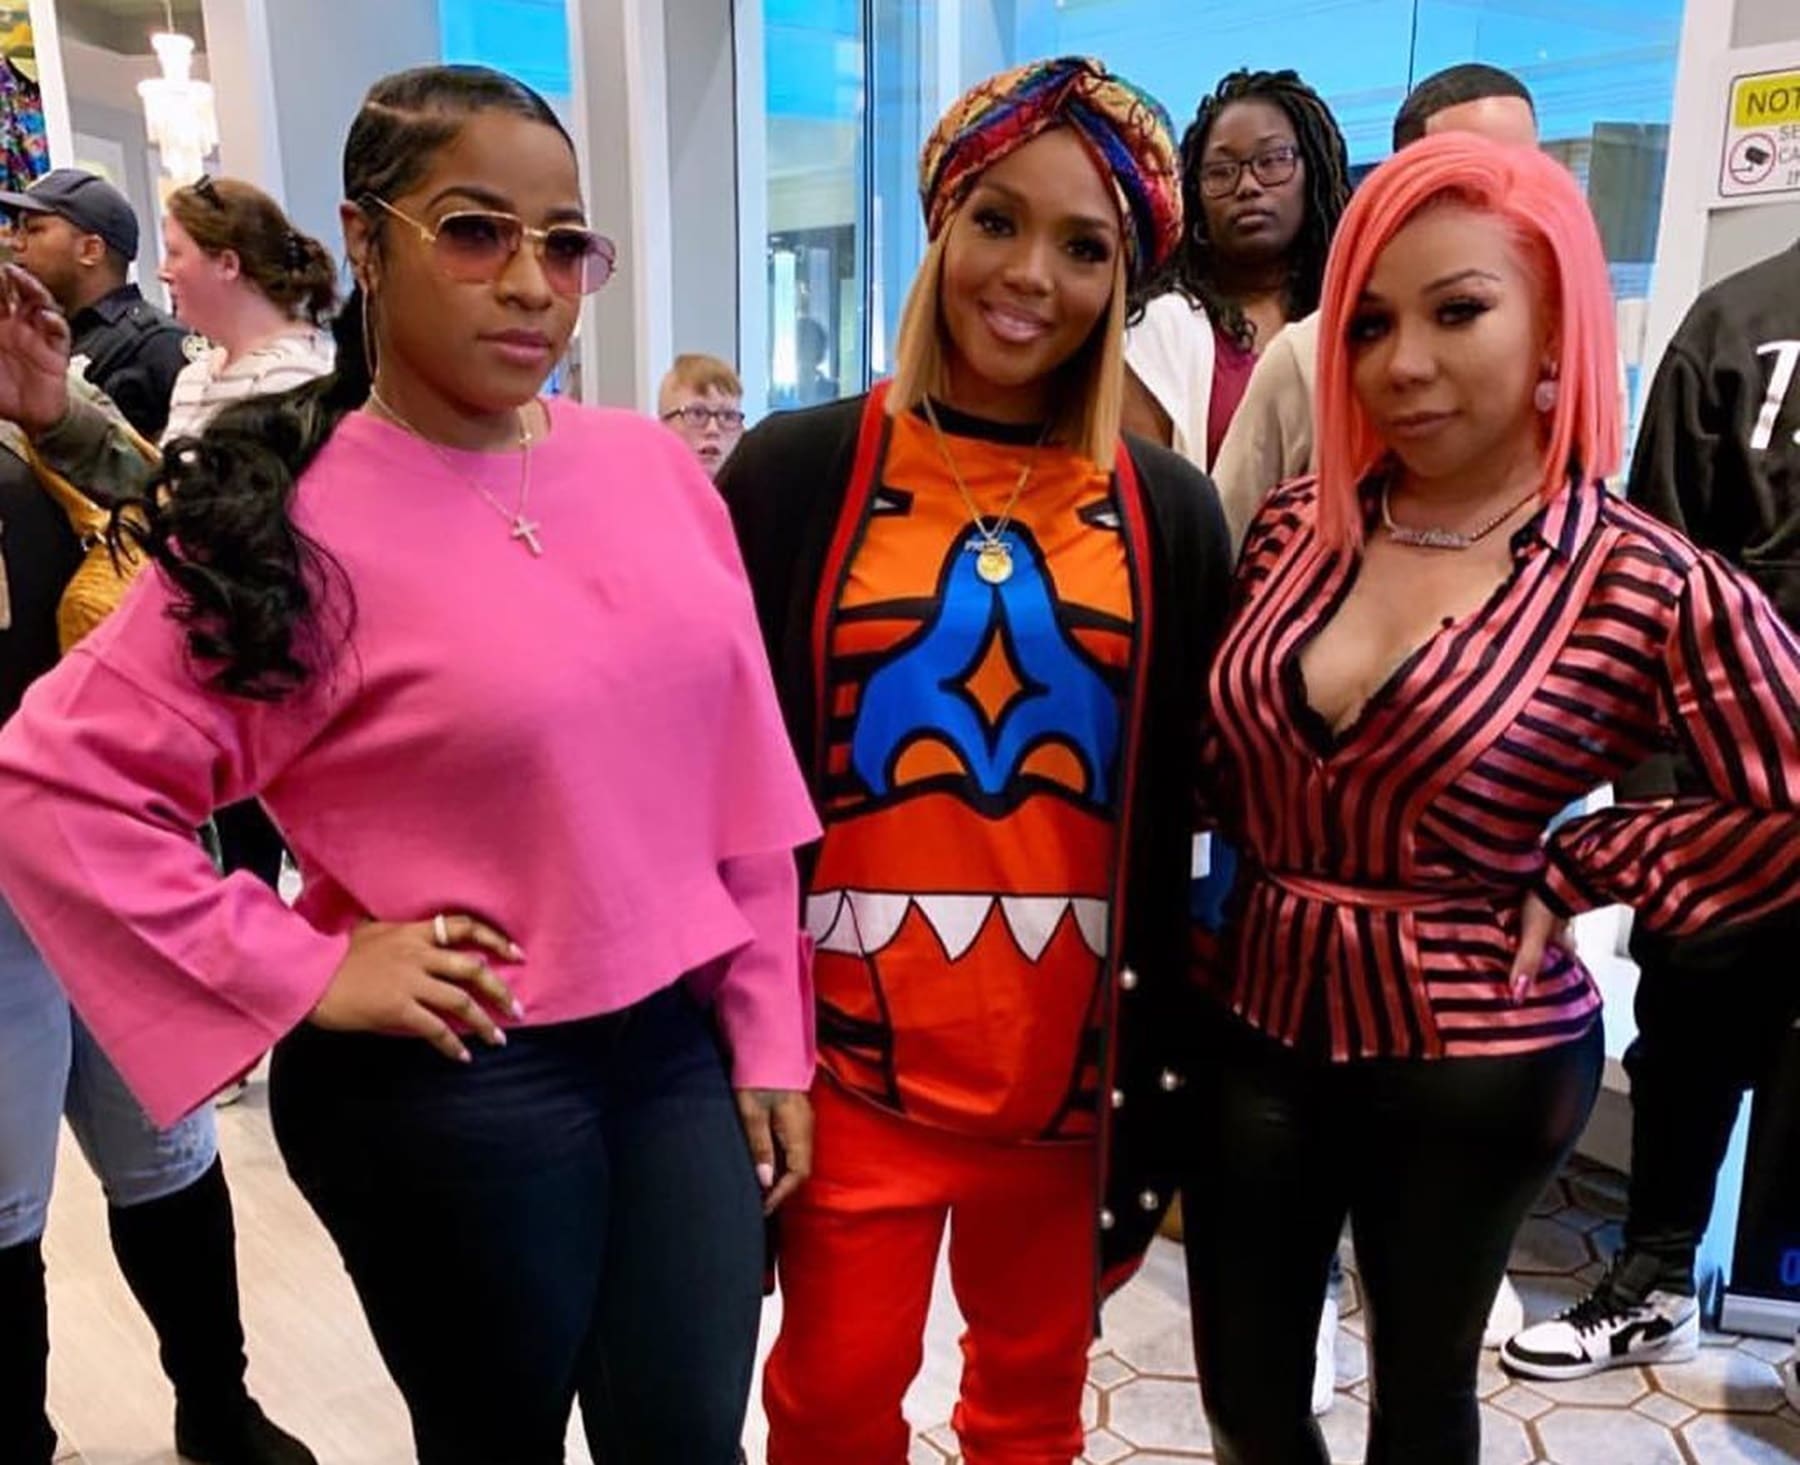 Rasheeda Frost Presents A Pair Of Blinging Boots Are Her Fashion-Enthusiast Fans Are Dying For Them